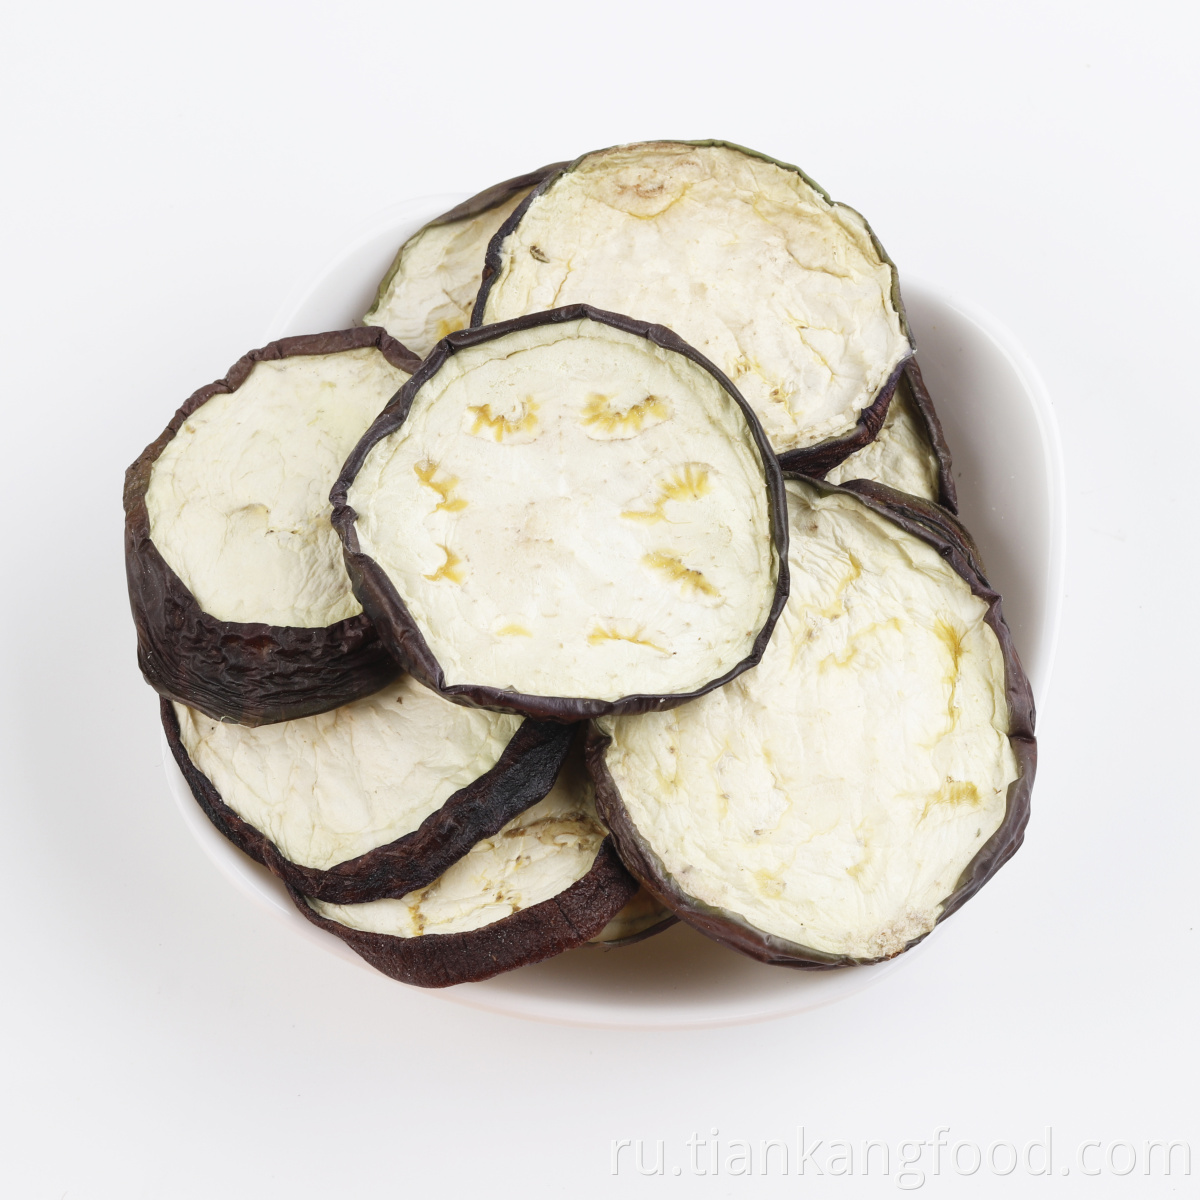 Wholesale dehydrated eggplant slices